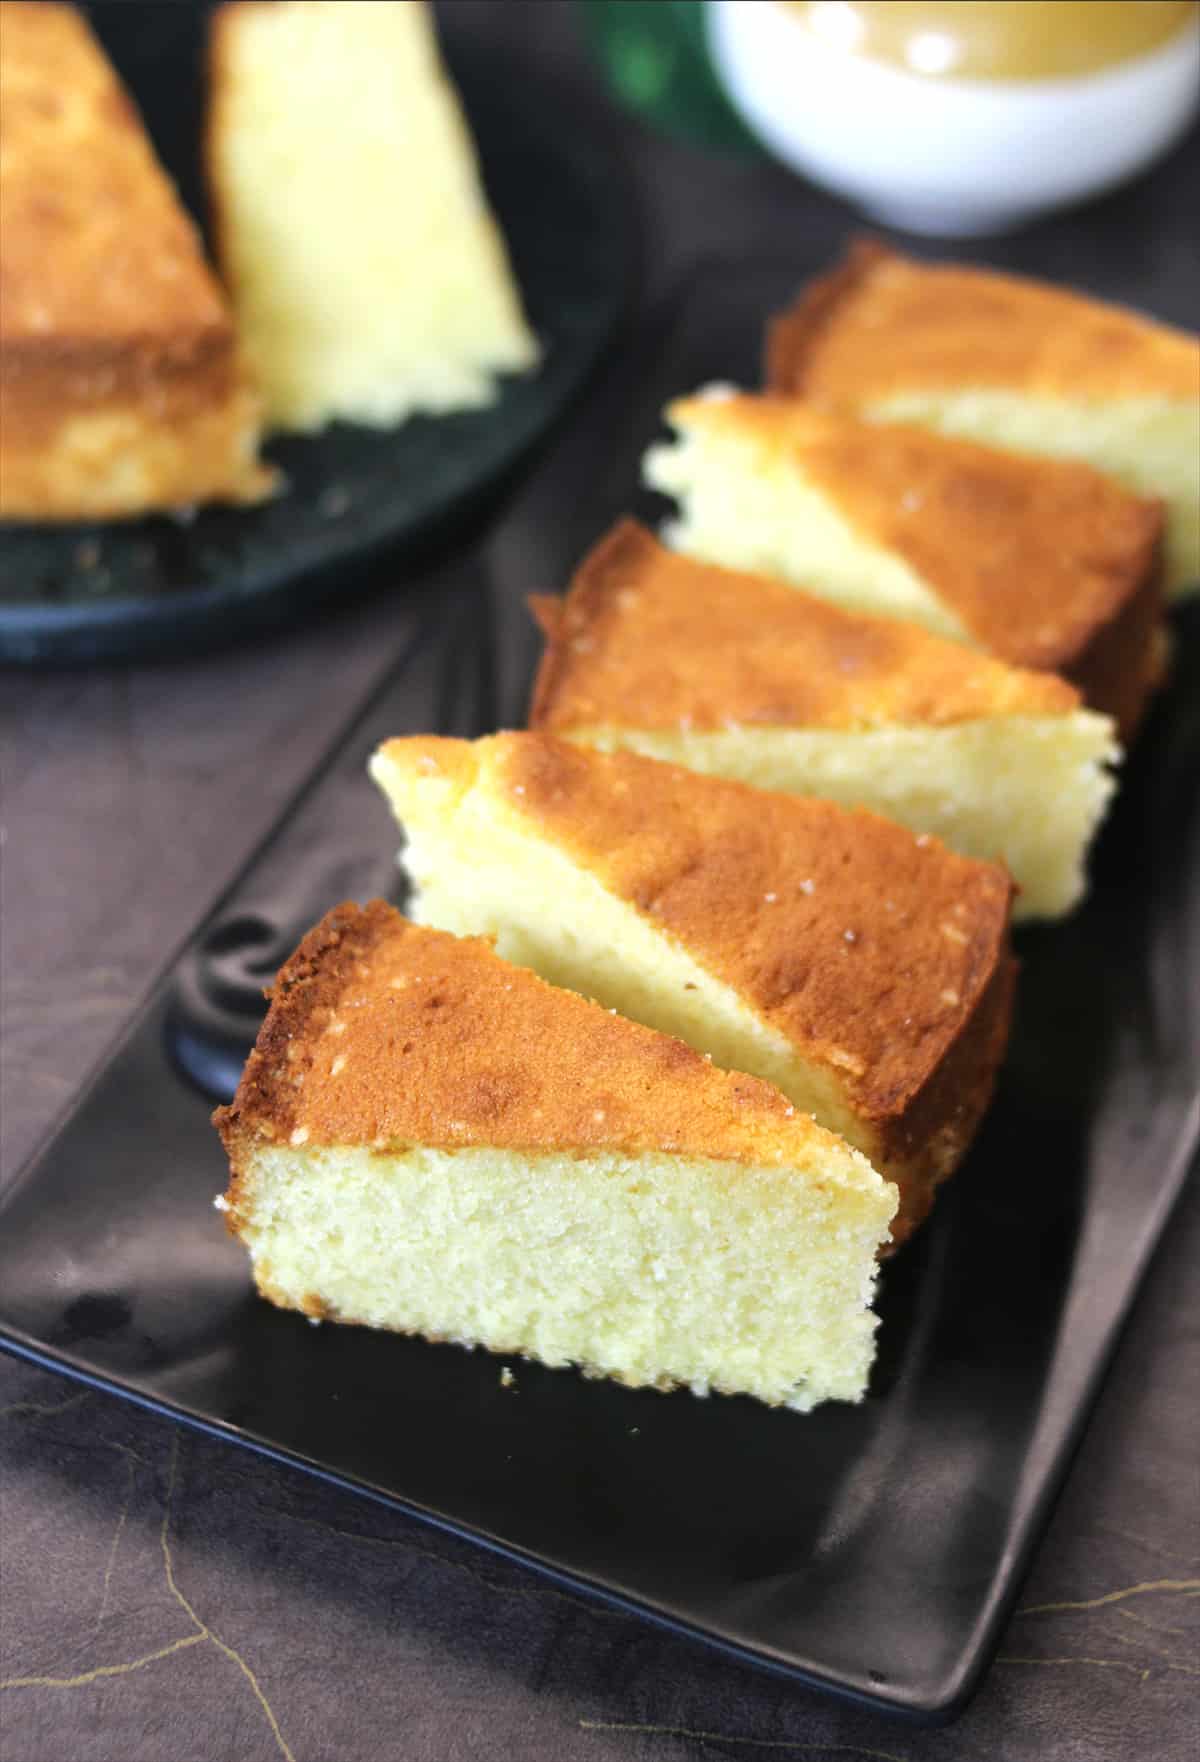 Butter cake or moist ghee cake slices on black plate ready to serve